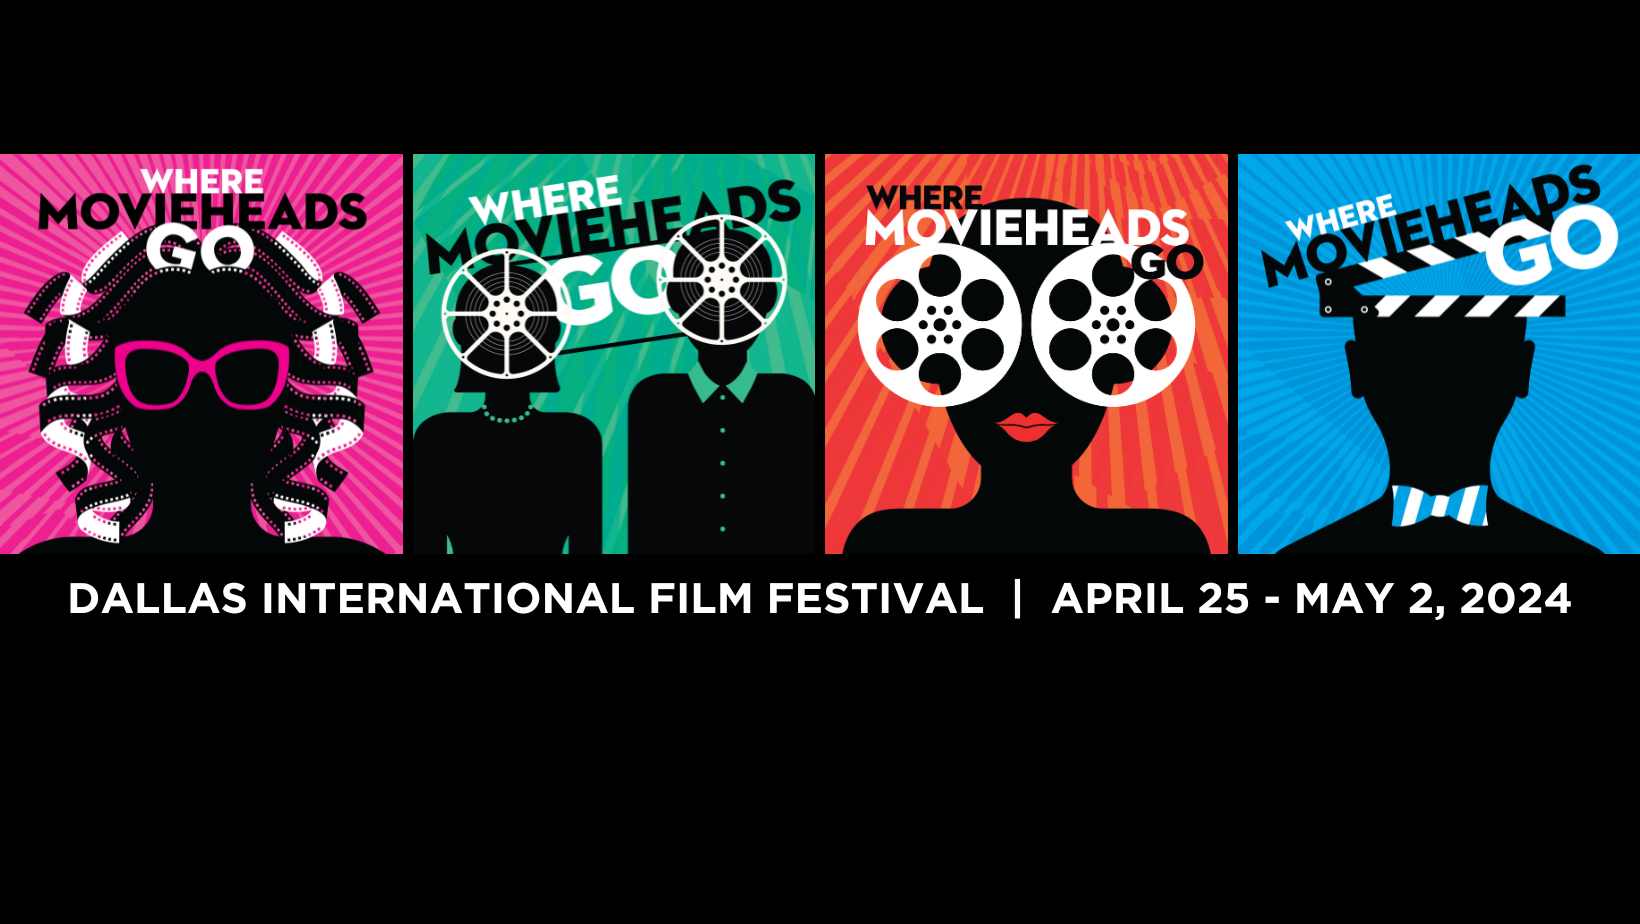 Dallas International Film Festival Releases Full Lineup of Films for DIFF 2024 Passes on Sale for April 25 – May 2, 2024 Festival at Violet Crown Cinema | DALLAS, TEXAS